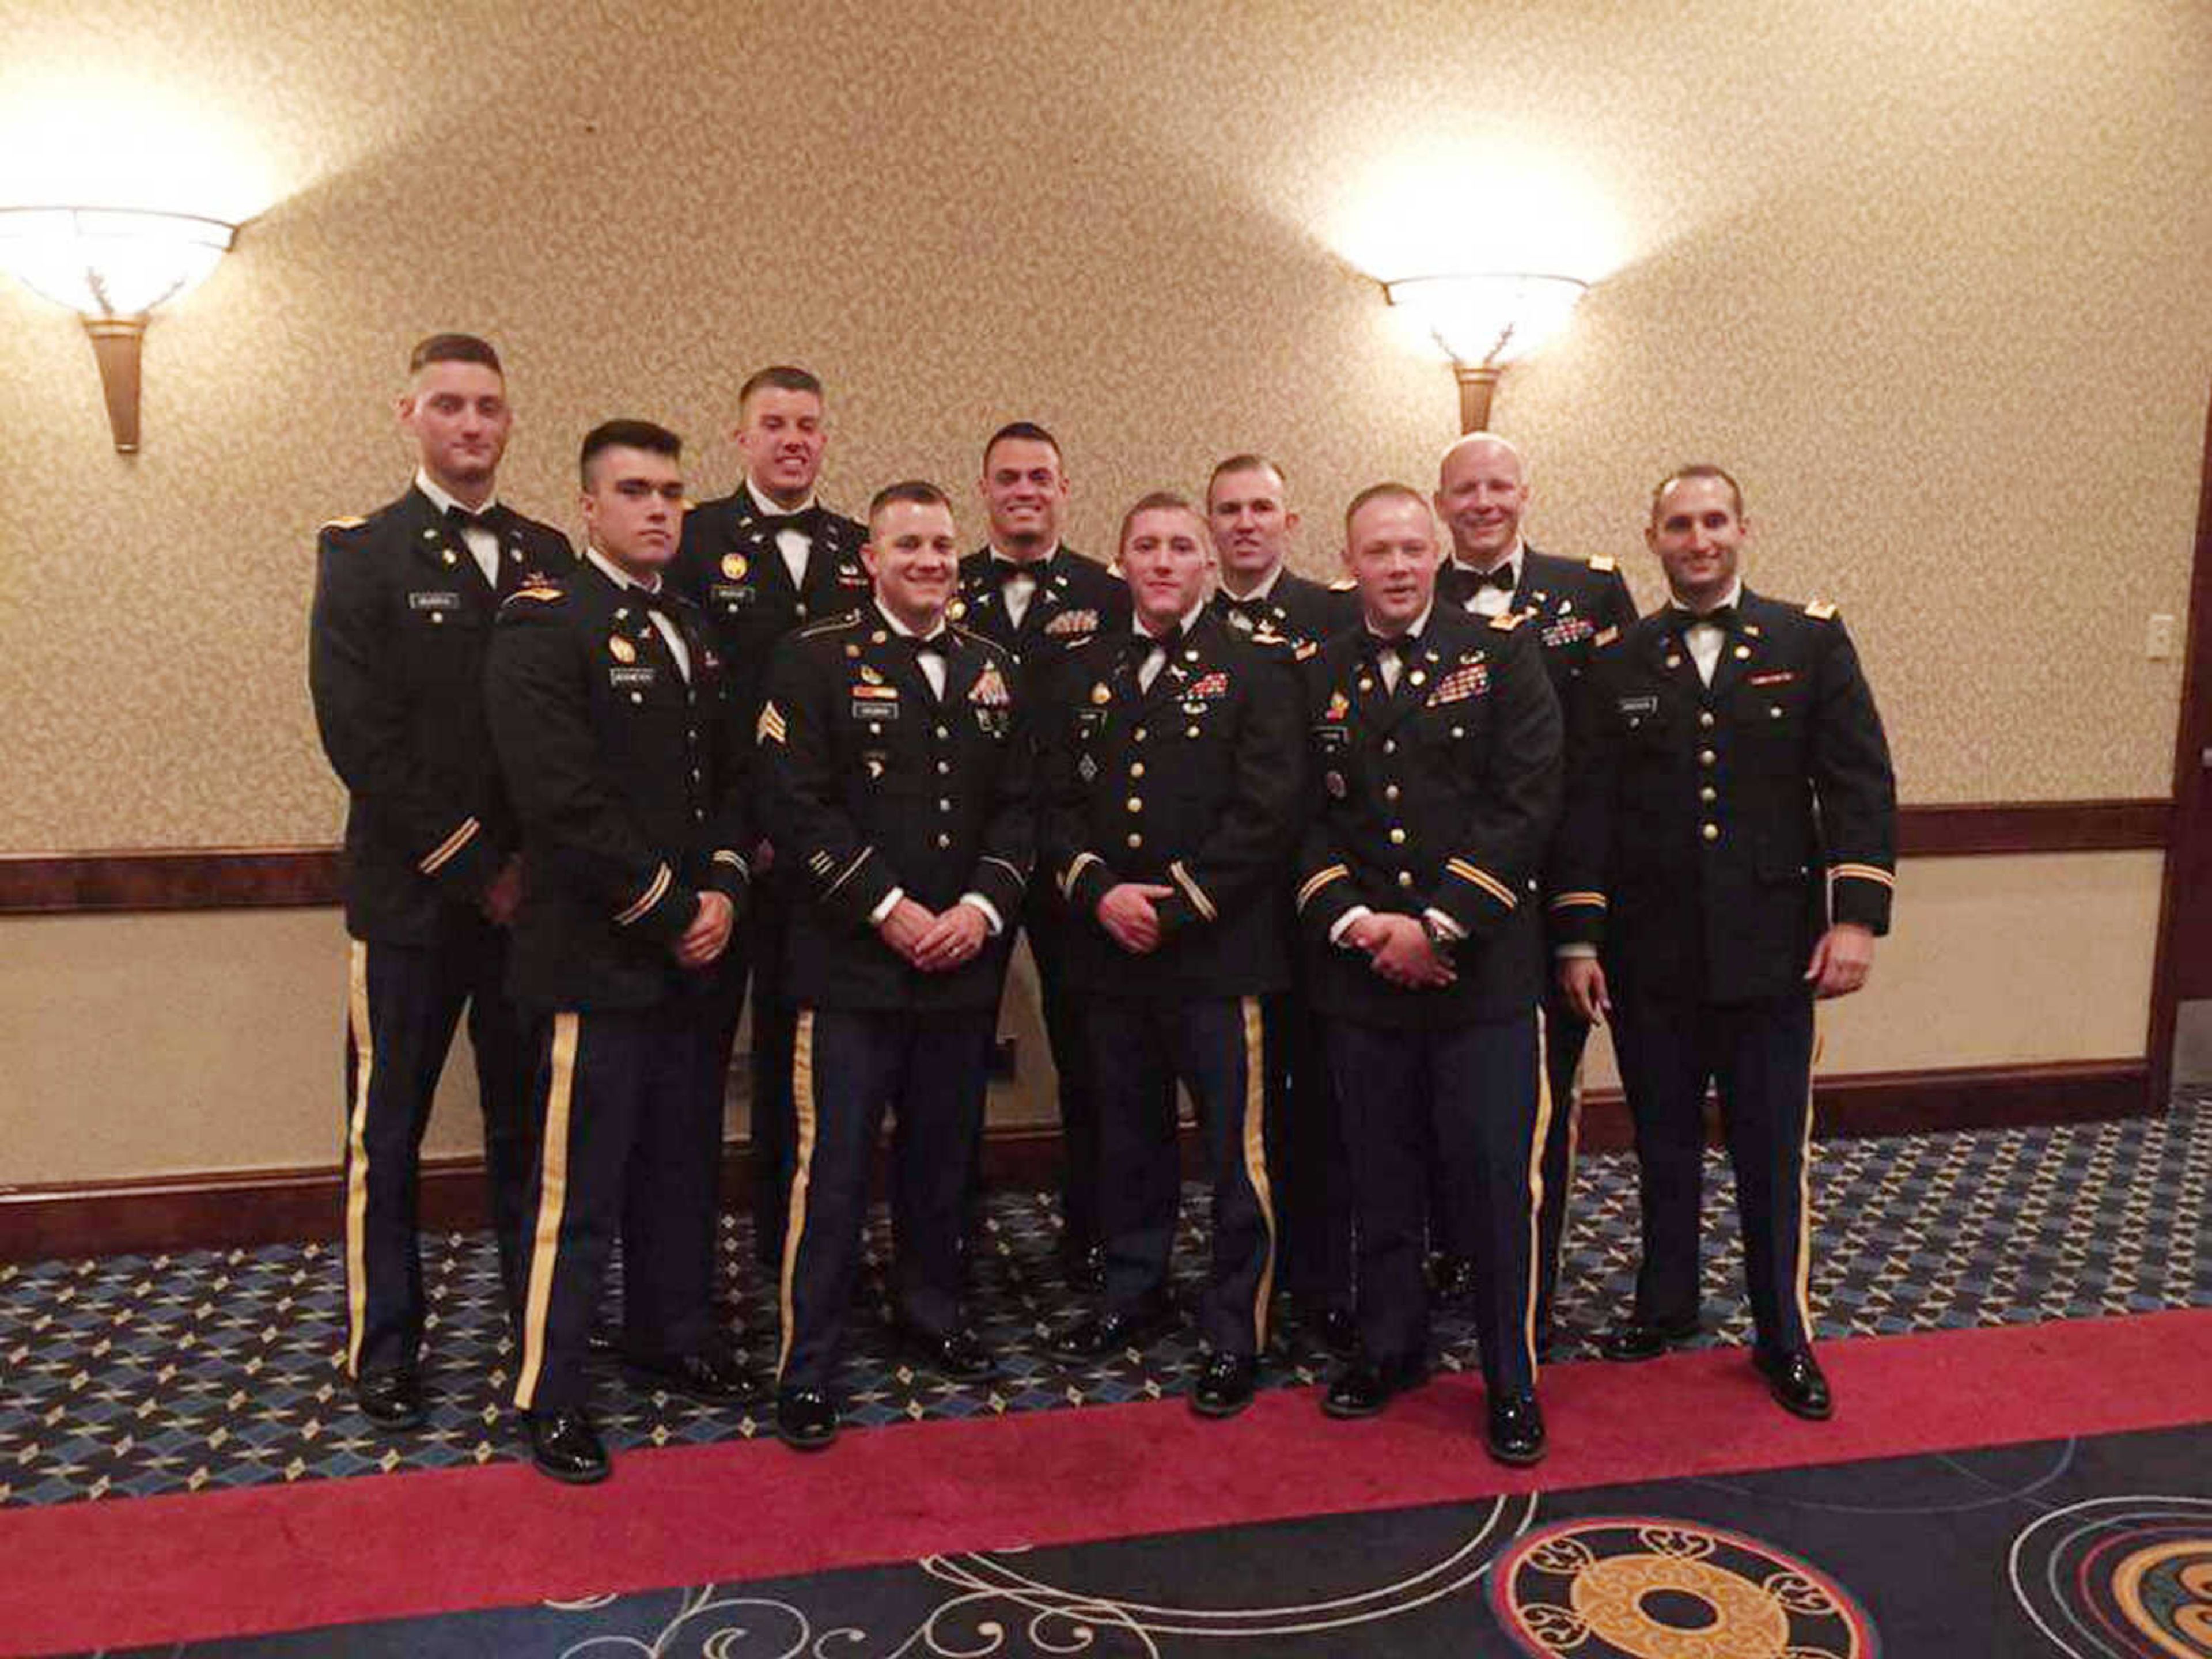 Seven soldiers from Southeast Missouri State University were commissioned as second lieutenants at a ceremony Saturday in Jefferson City, Missouri.